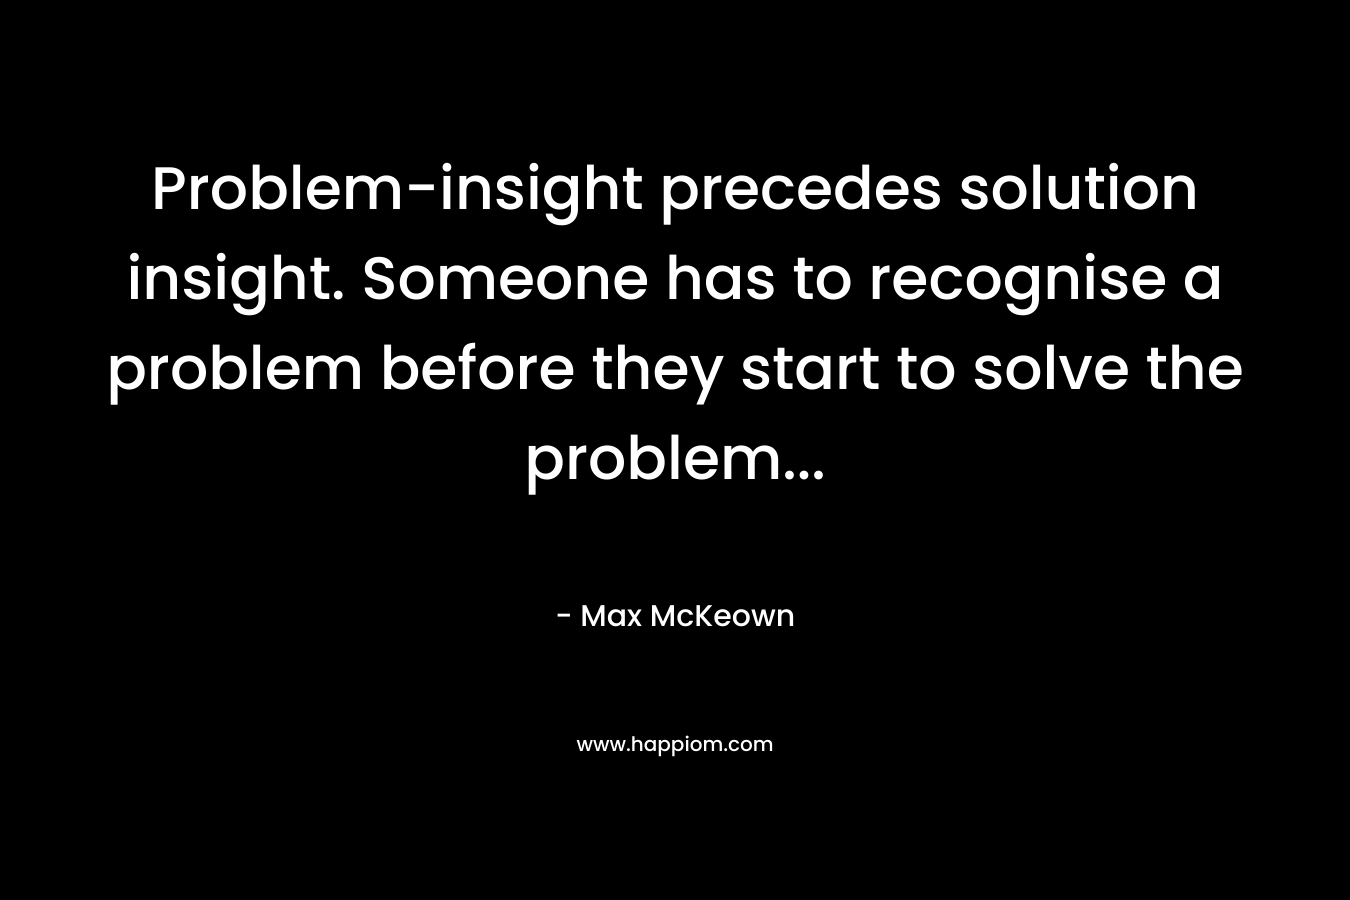 Problem-insight precedes solution insight. Someone has to recognise a problem before they start to solve the problem...